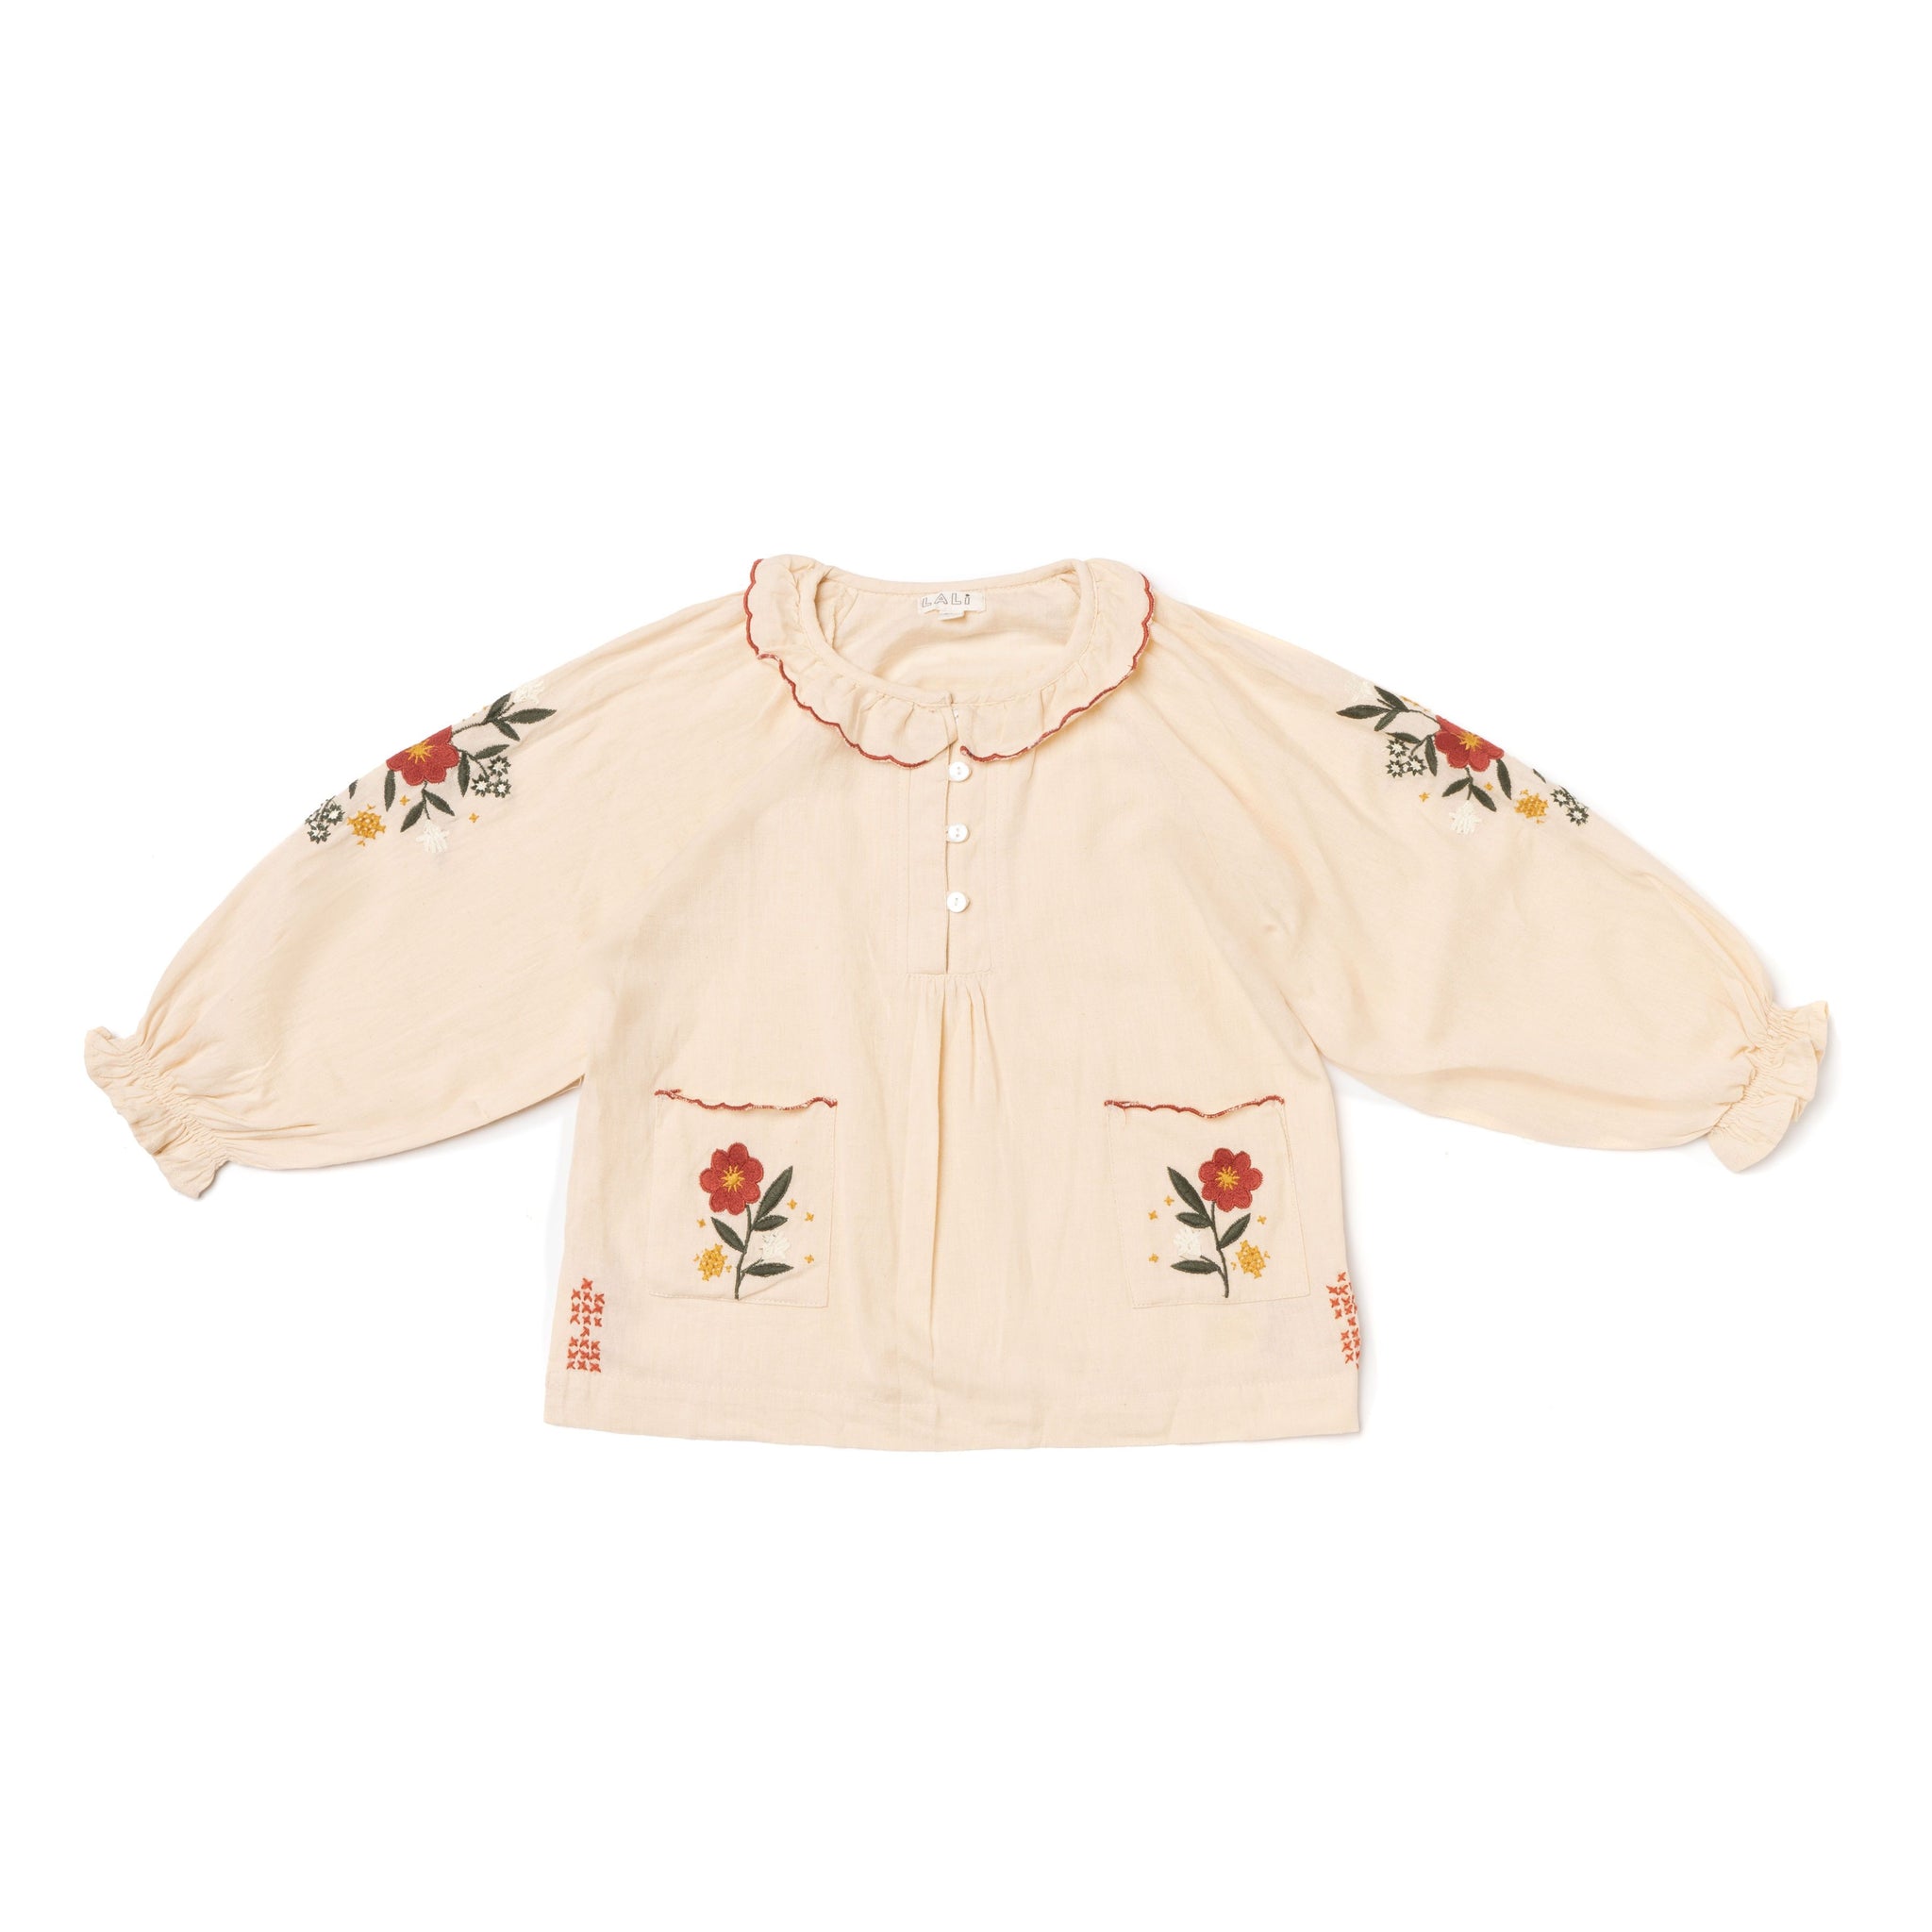 Macademia Embroidered Top